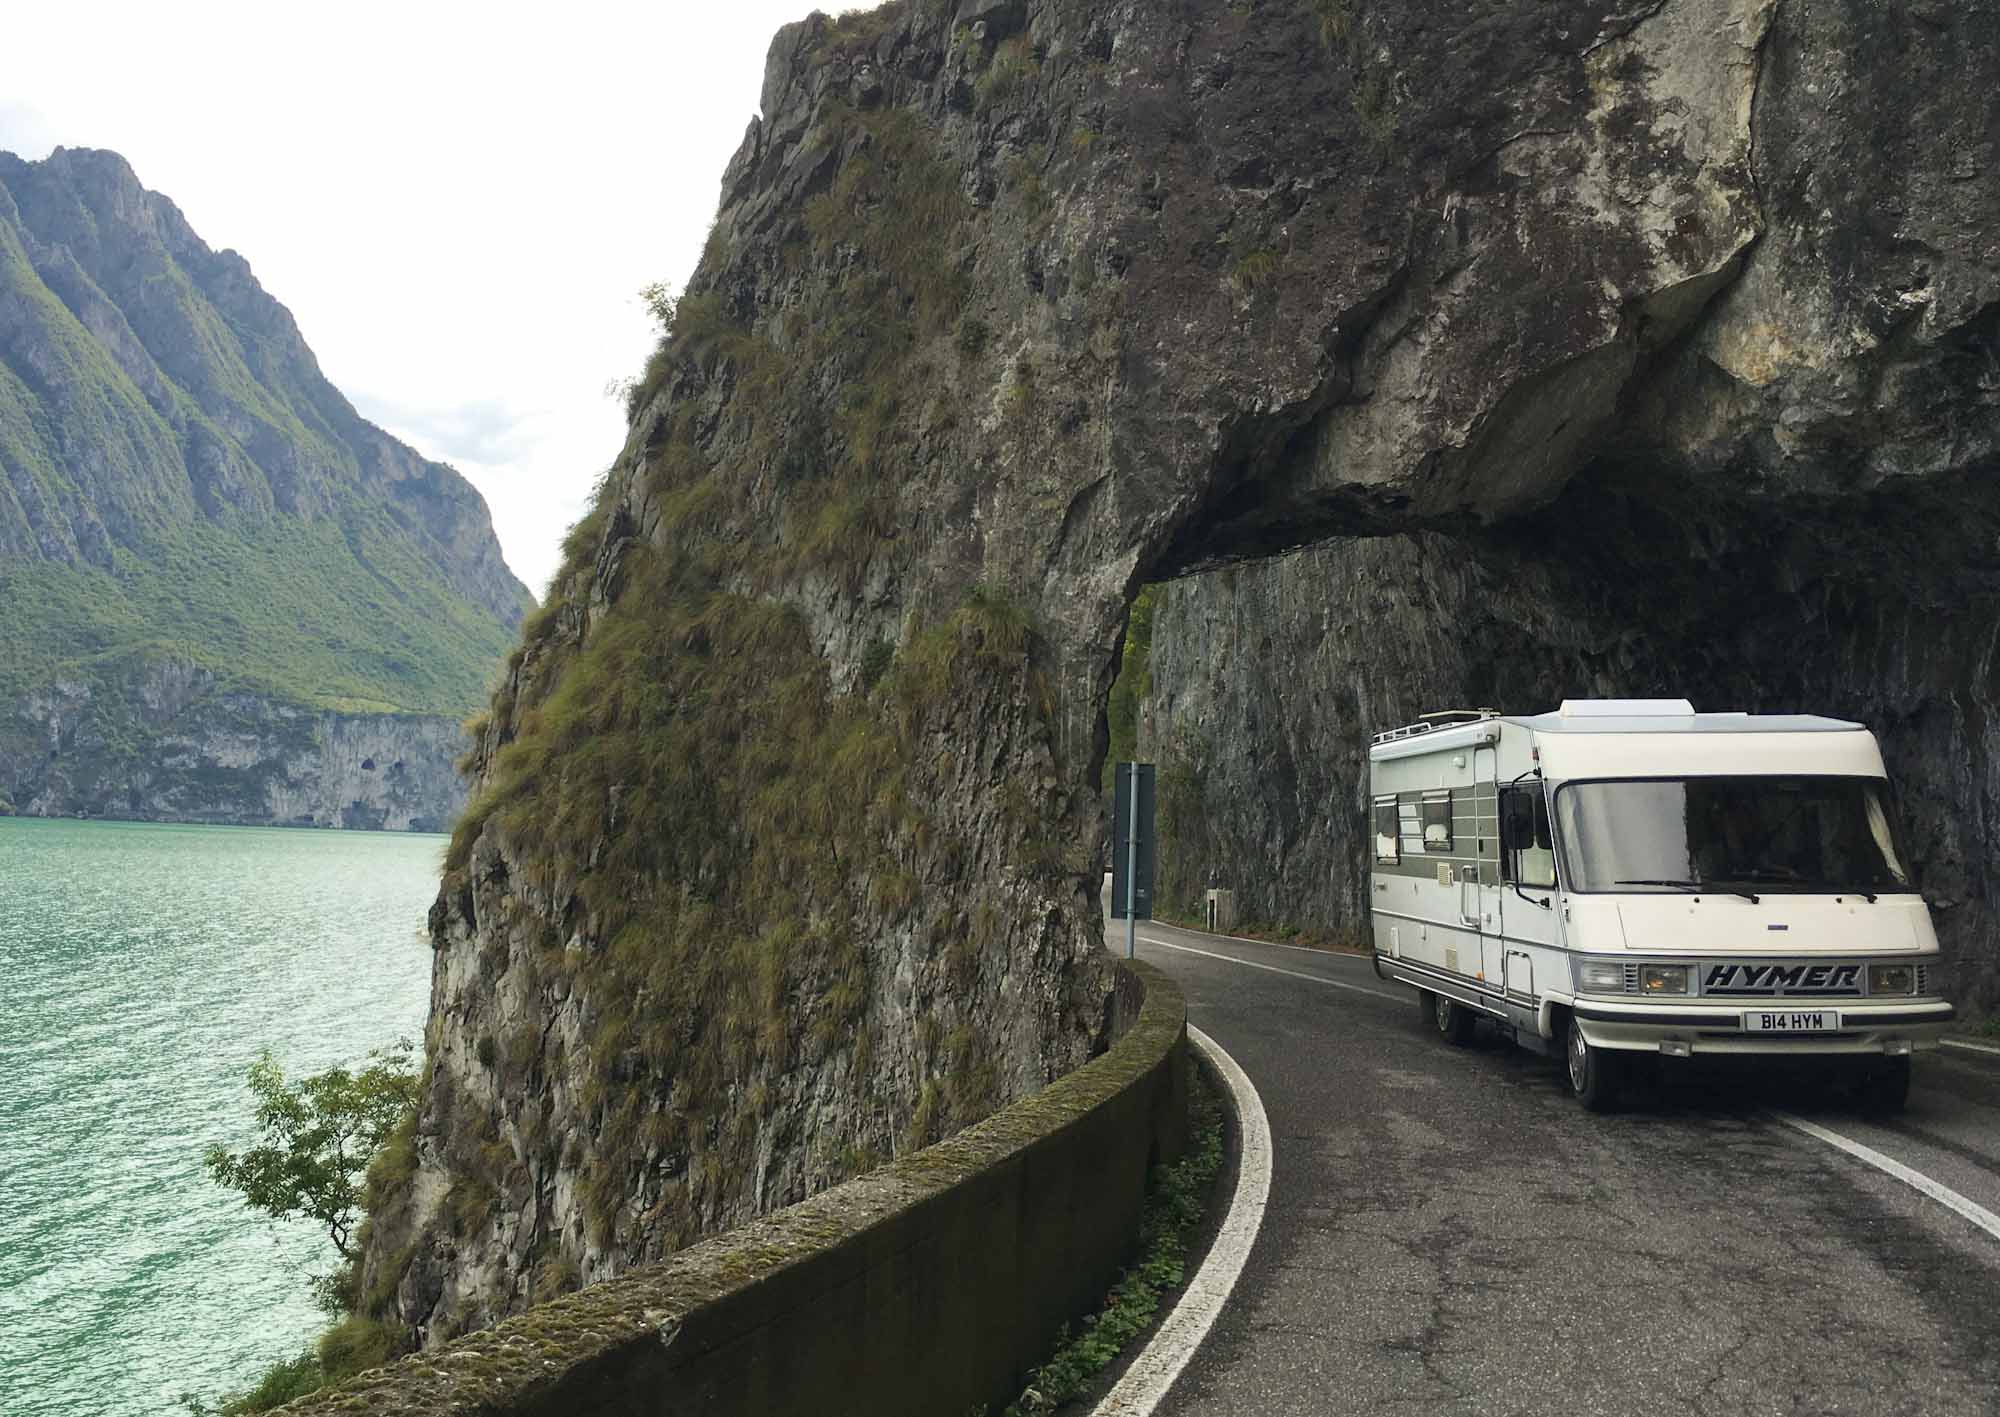 Classic Hymer motorhome driving through a natural rock road tunnel, by the side of a lake